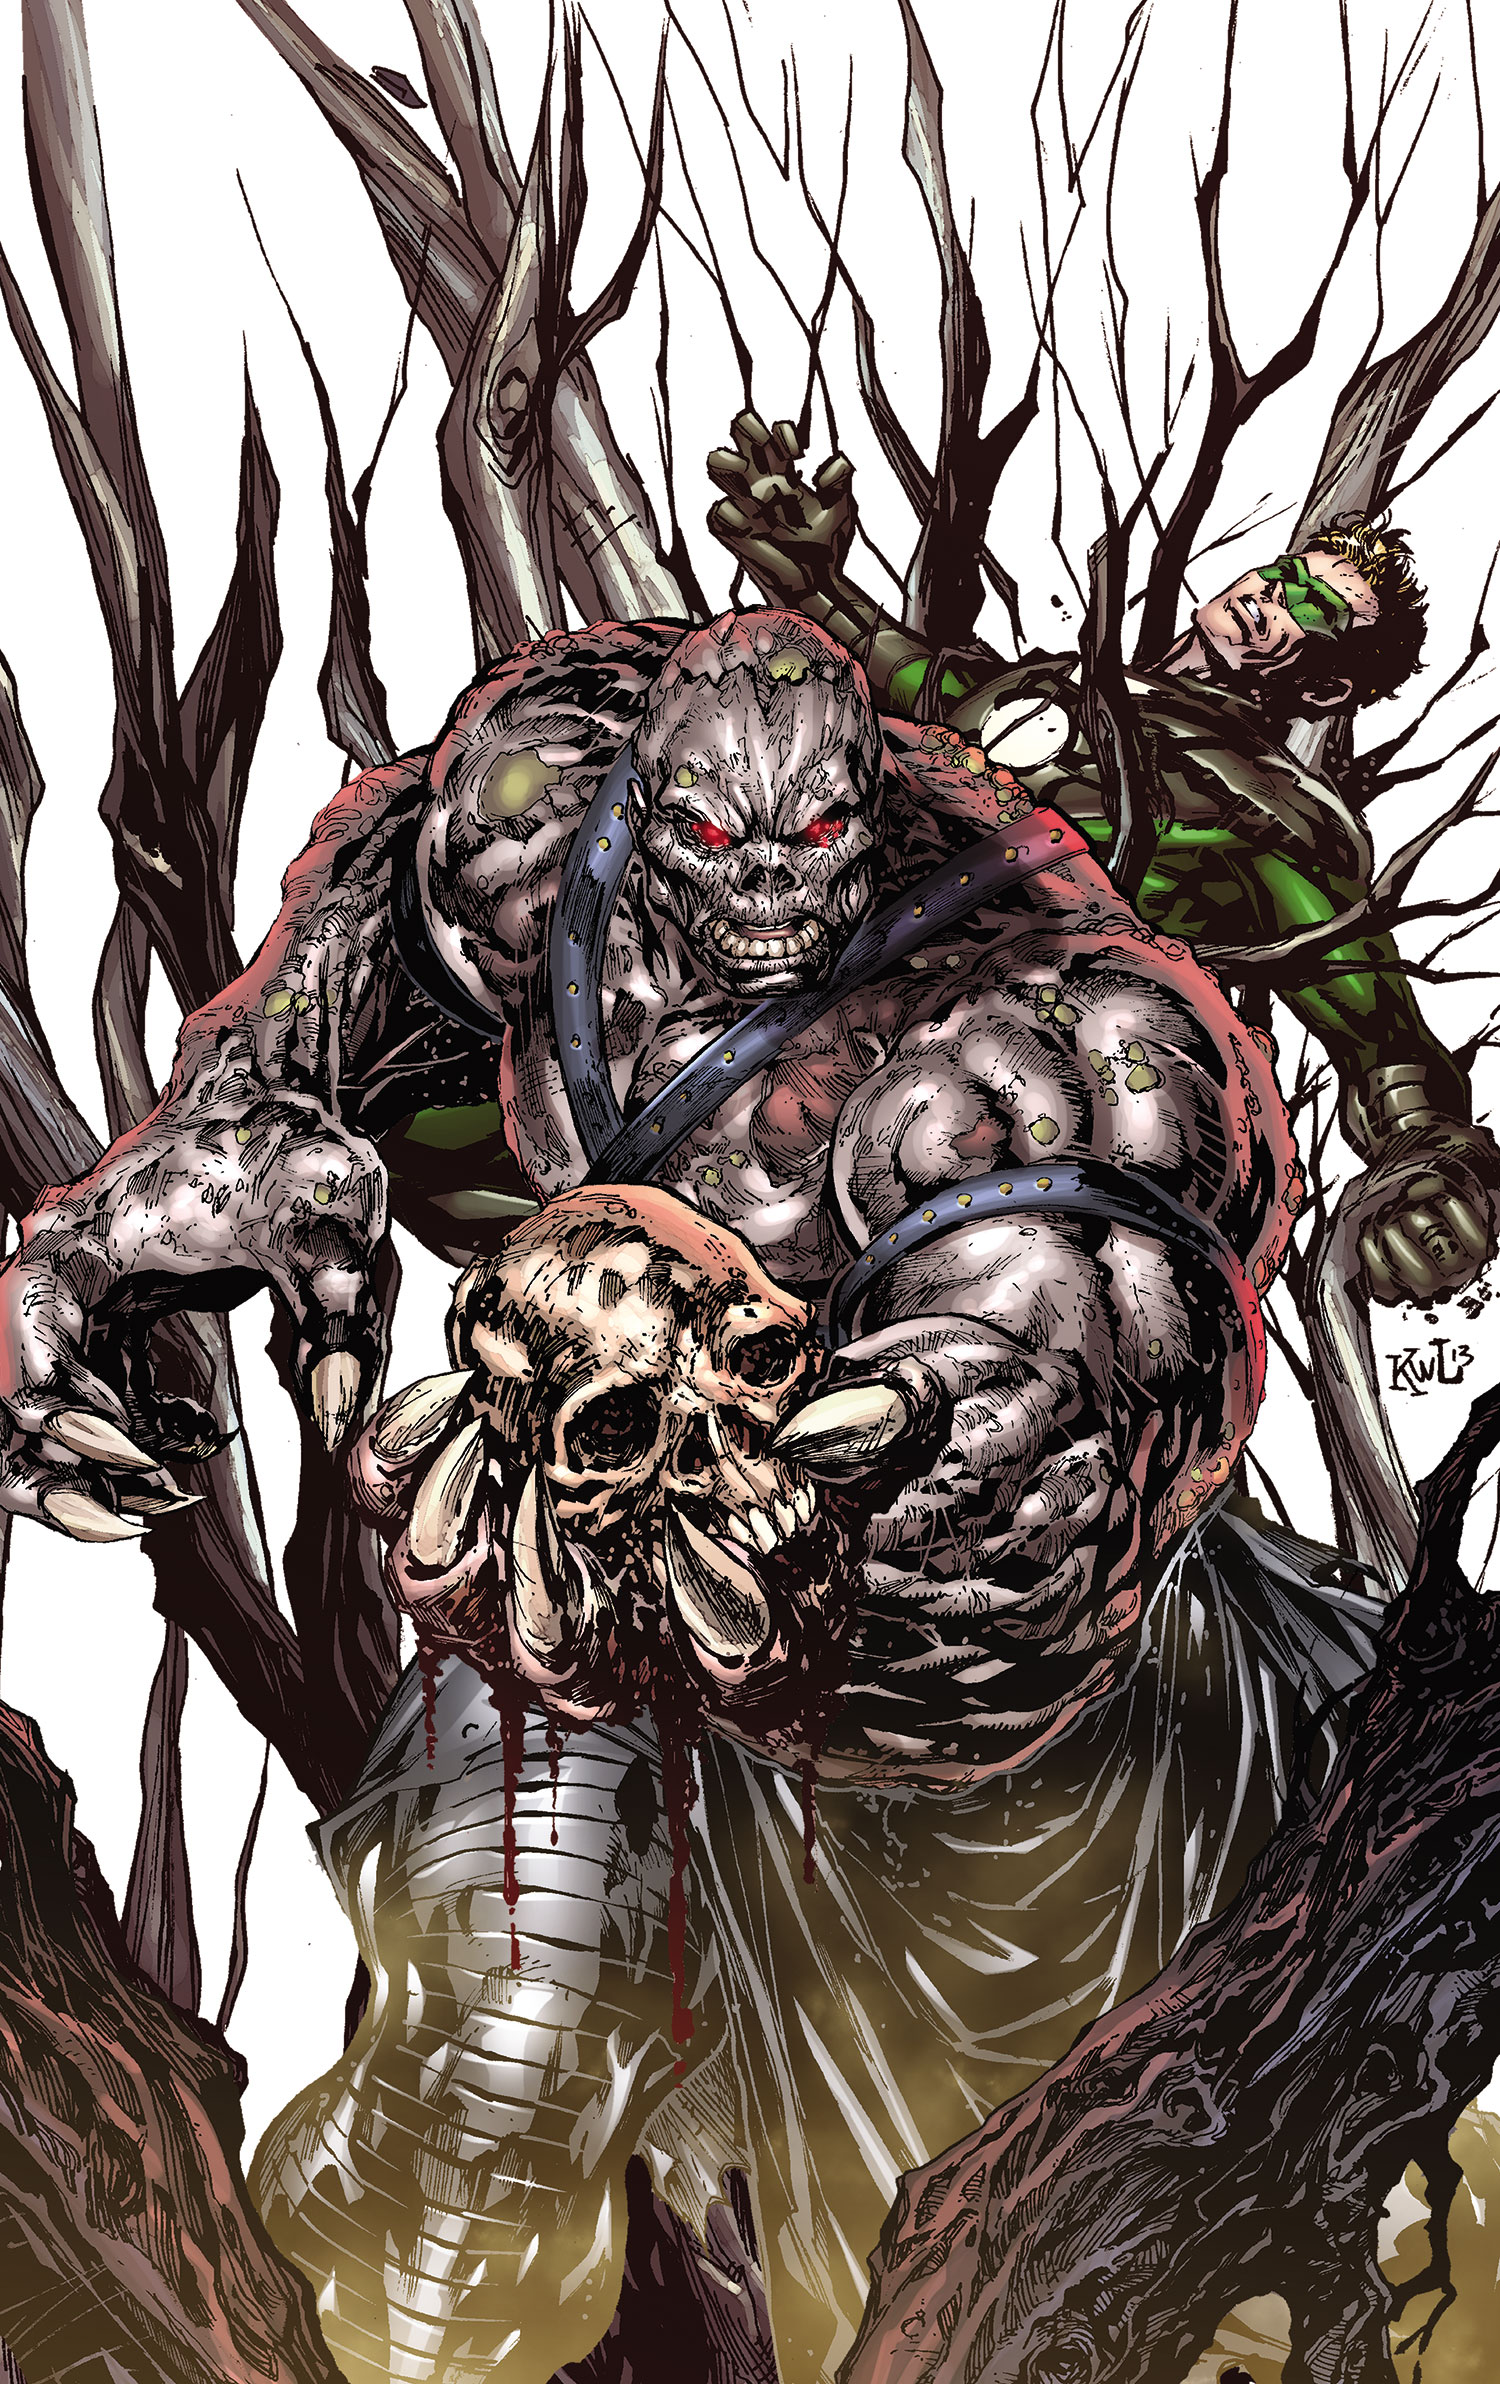 Solomon Grundy of the Injustice Gang